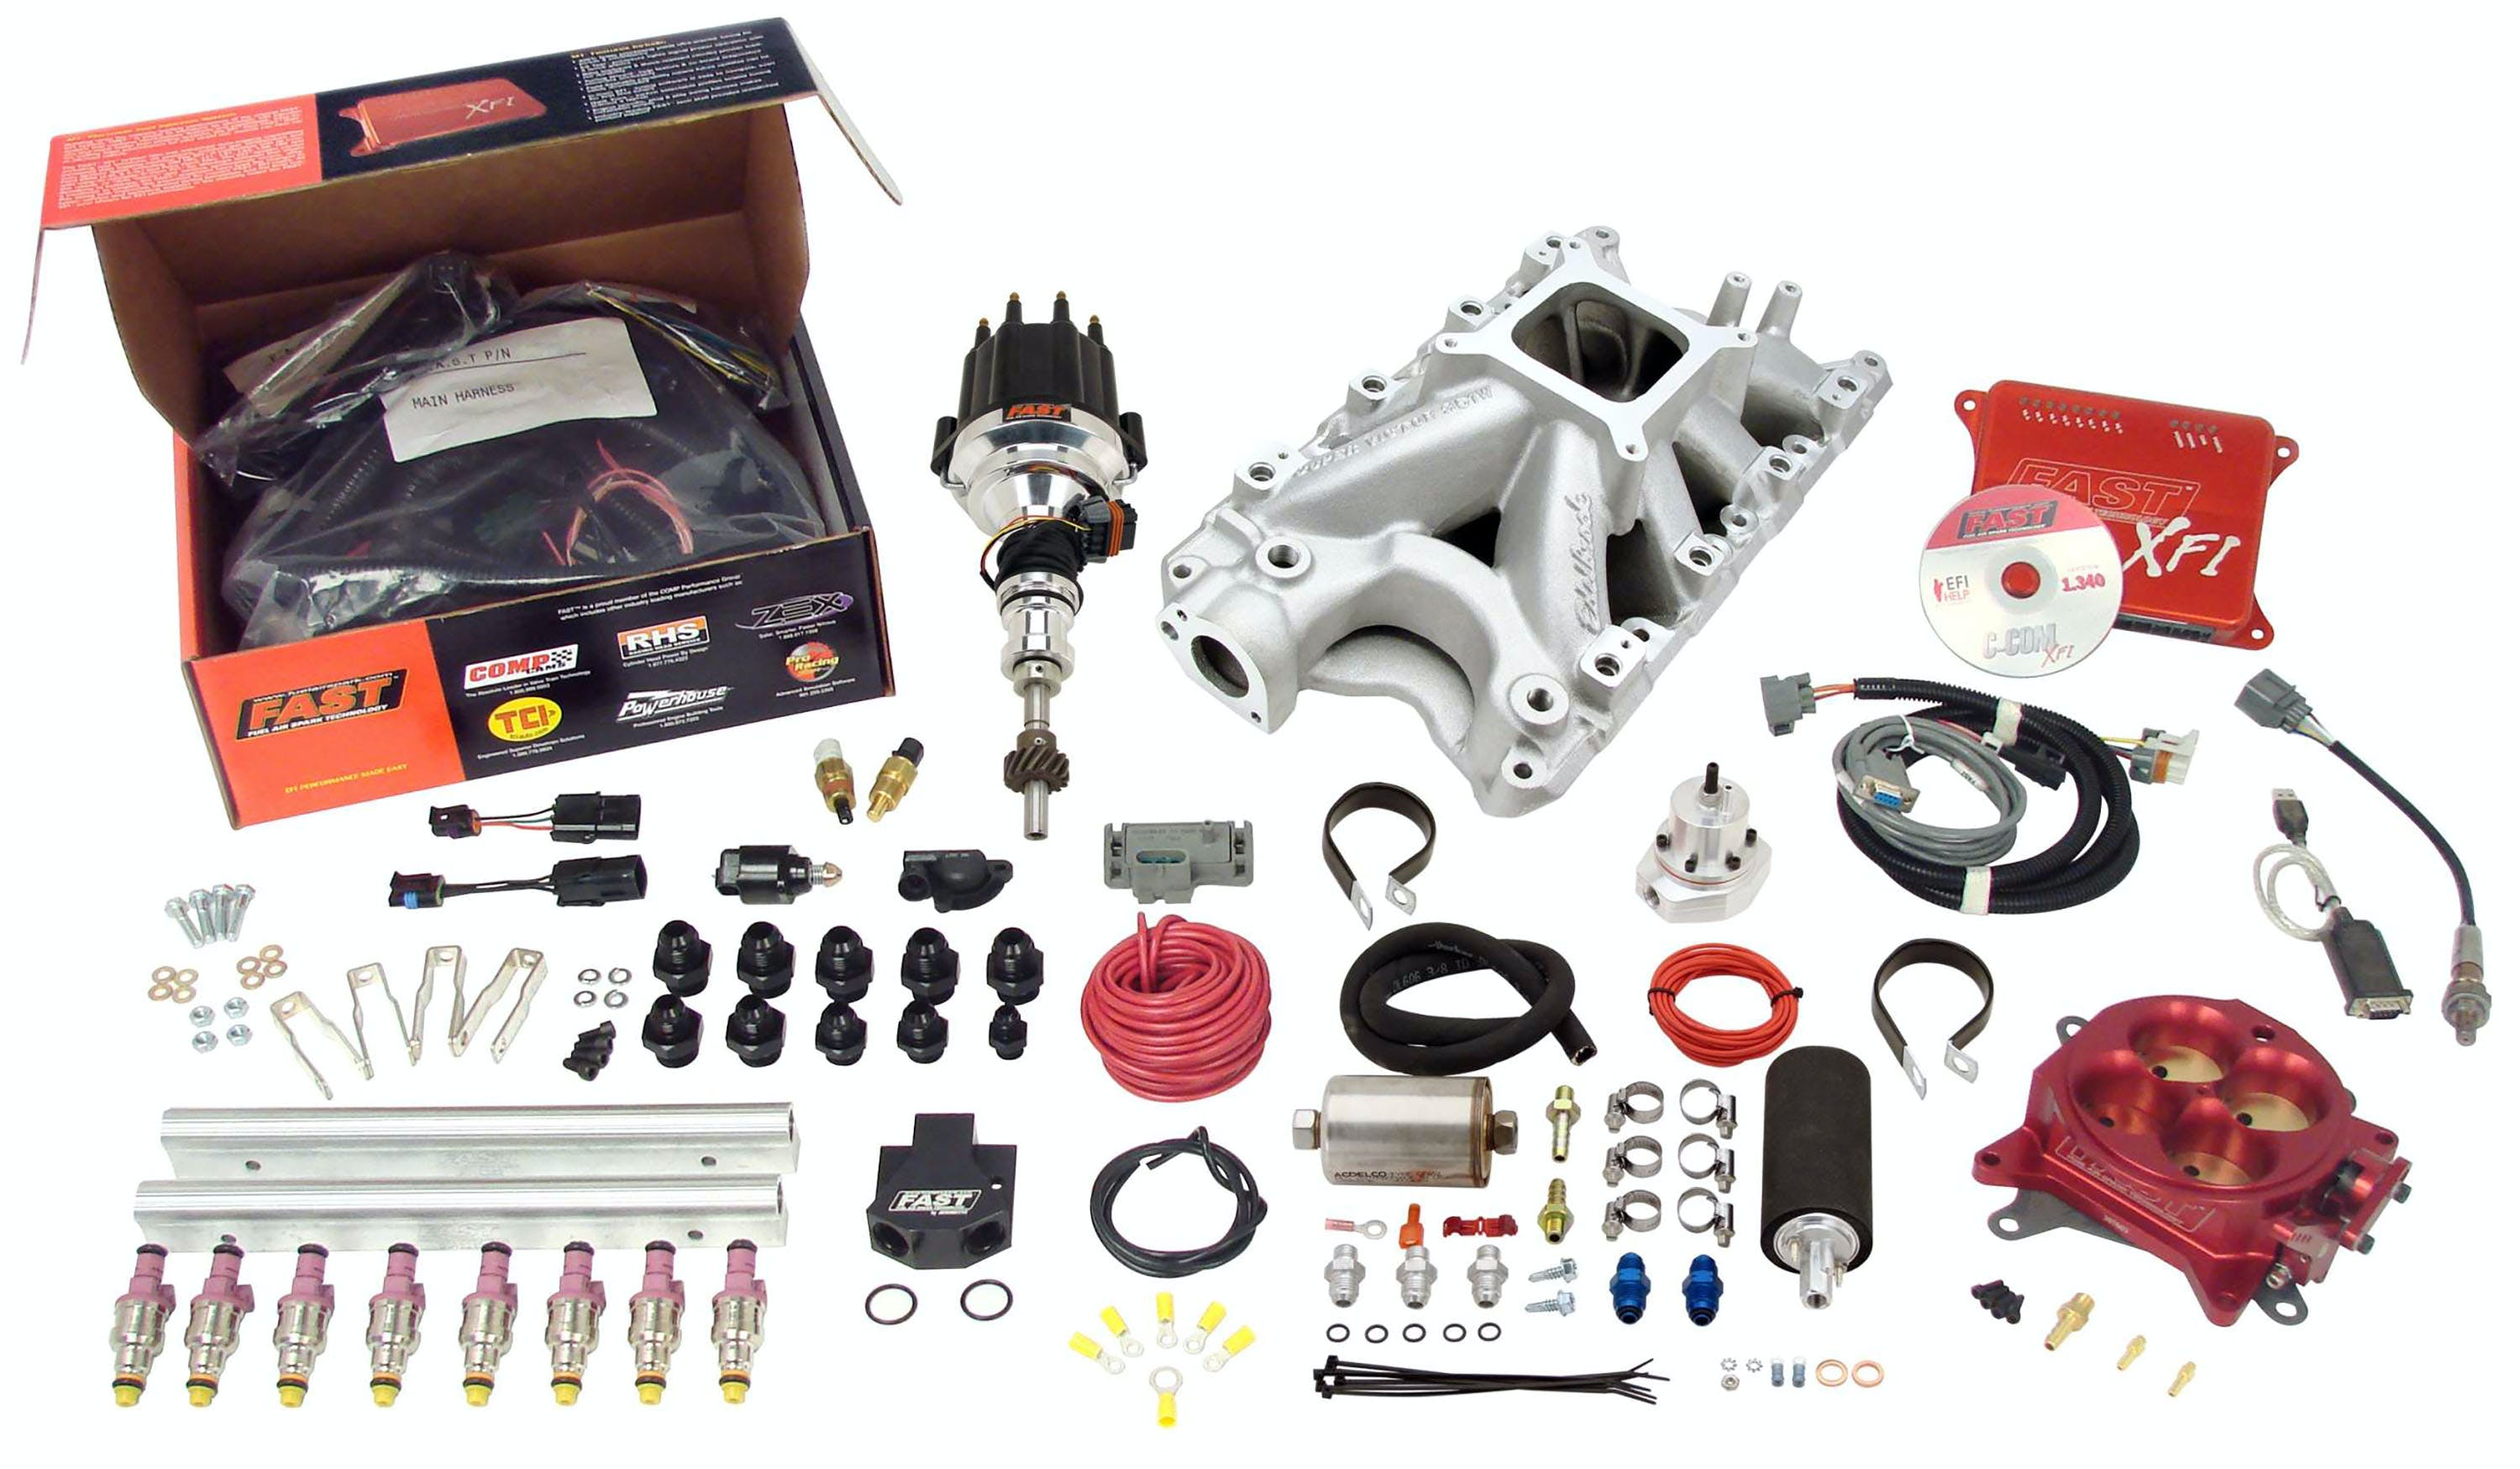 FAST - Fuel Air Spark Technology 3031302-05 XFI SBF Kit with 500HP Pump